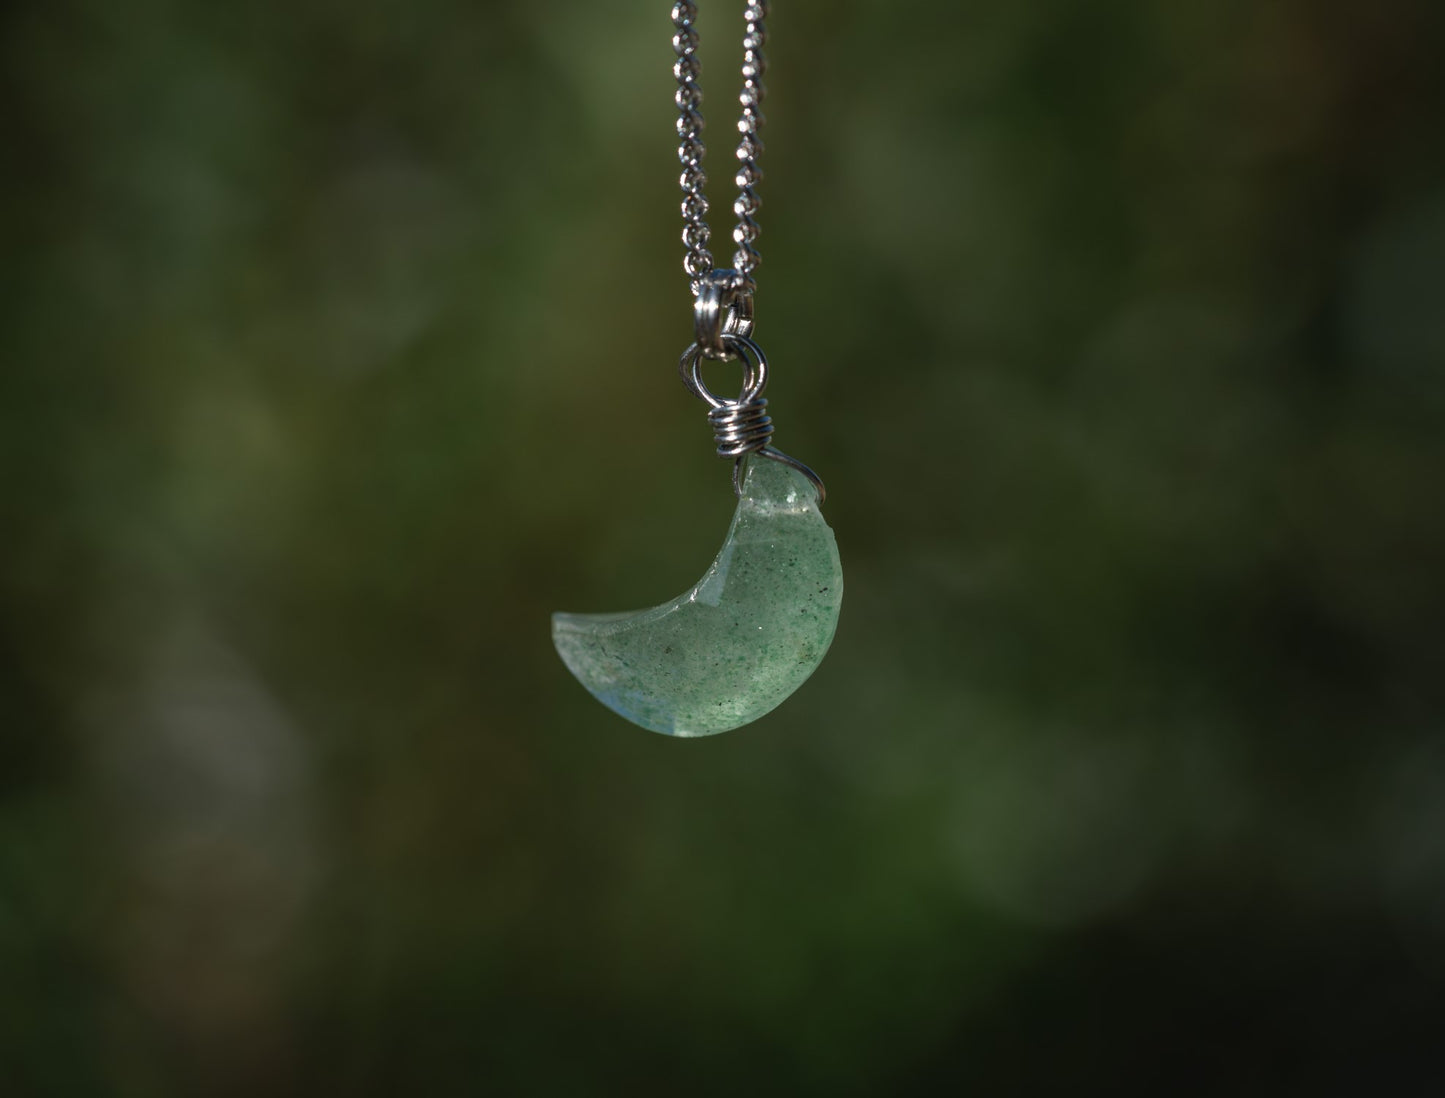 'Trust Yourself’ Green Strawberry Quartz Crescent Moon Stainless Steel Necklace